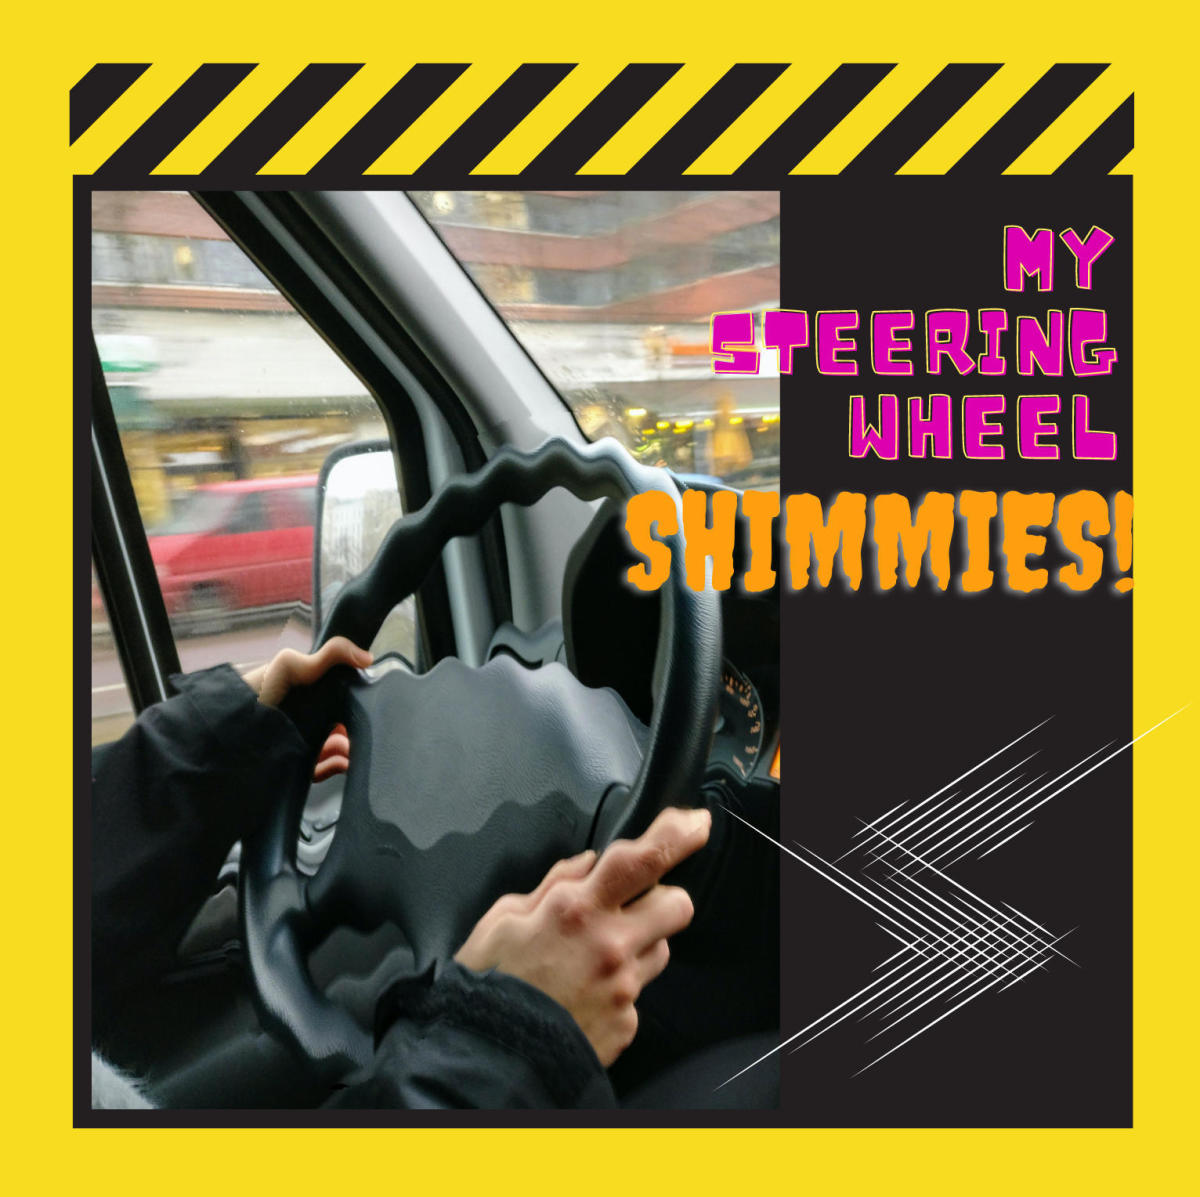 Why Does My Car's Steering Wheel Shimmy?